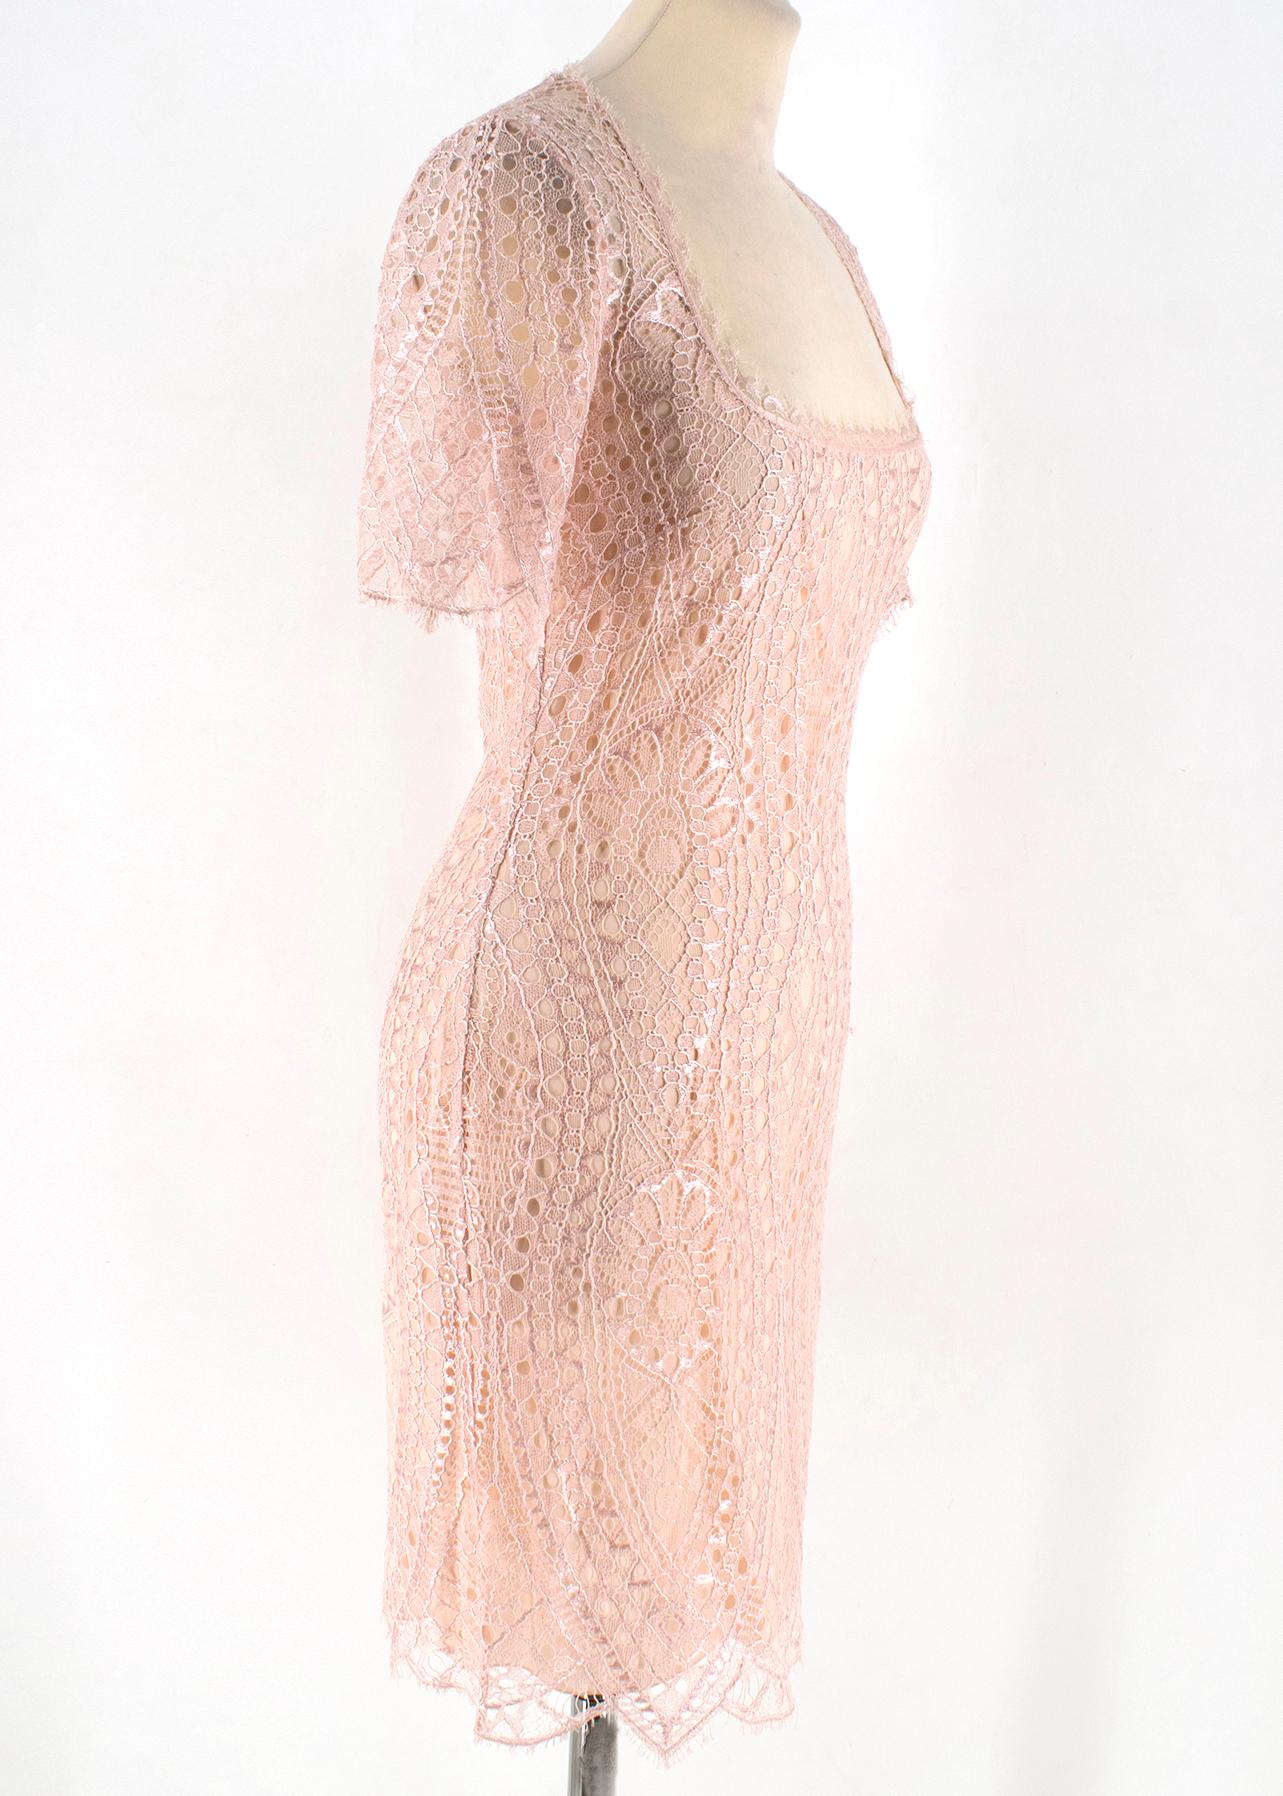 Emilio Pucci elegant pink lace mini dress with square neckline and open back. RRP £1590

- Button at back neck
- Short sleeves
- Concealed back zip
- Fabric 1: 75% viscose, 25% nylon
- Fabric 2: 100% nylon
- Lining: 92% silk, 8% elastane
- Trim: 55%